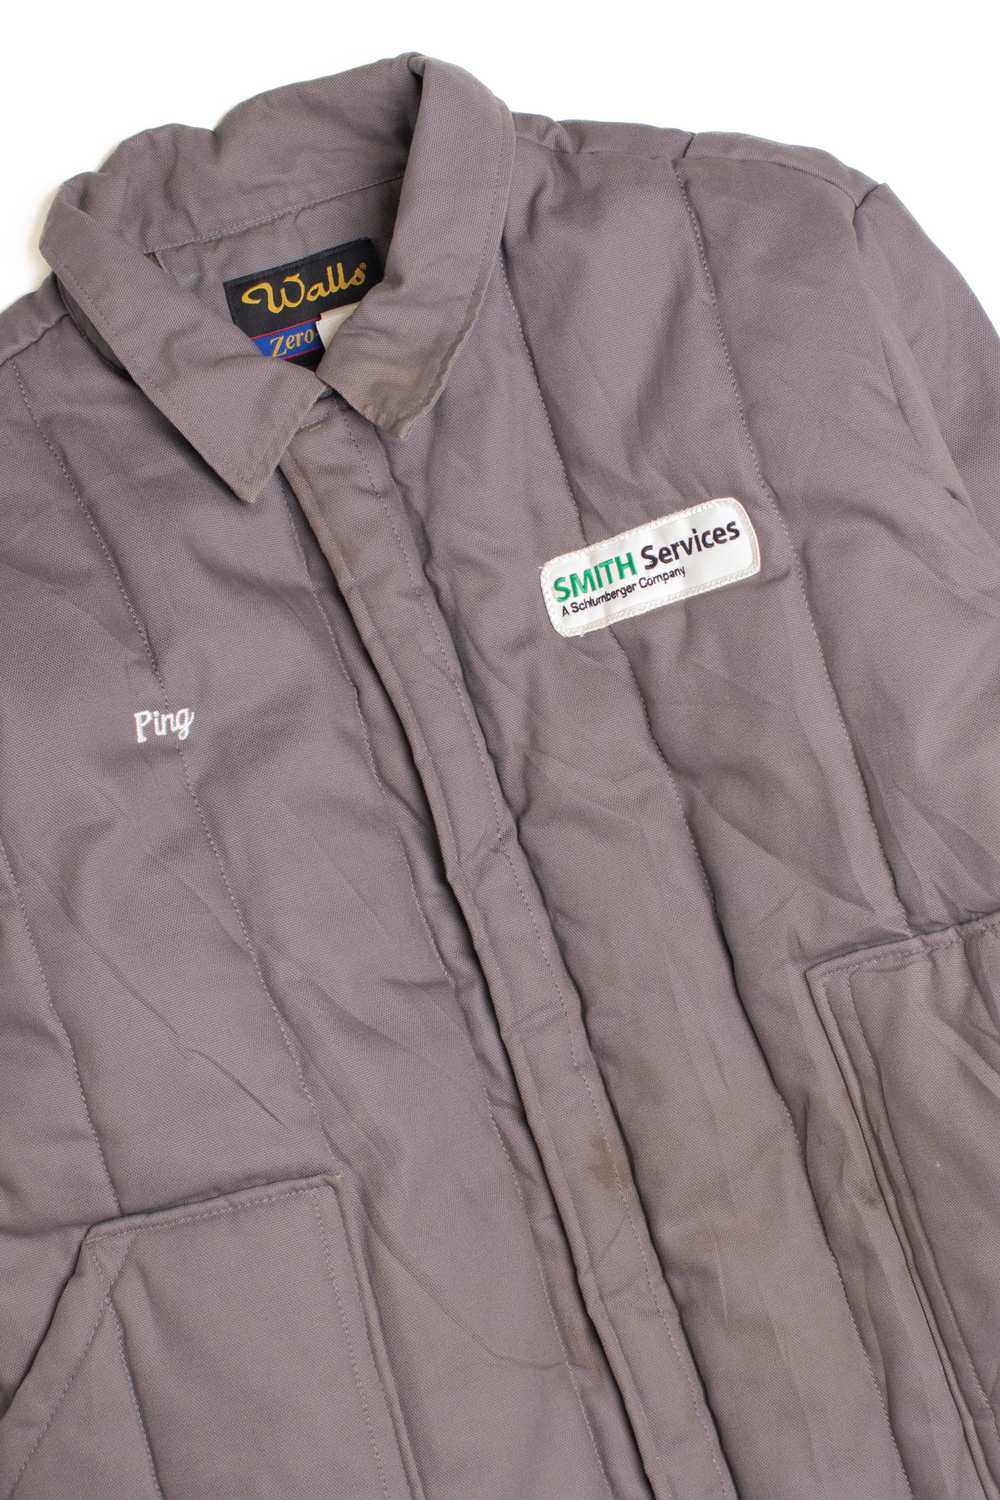 Smith Services Winter Coat - image 2